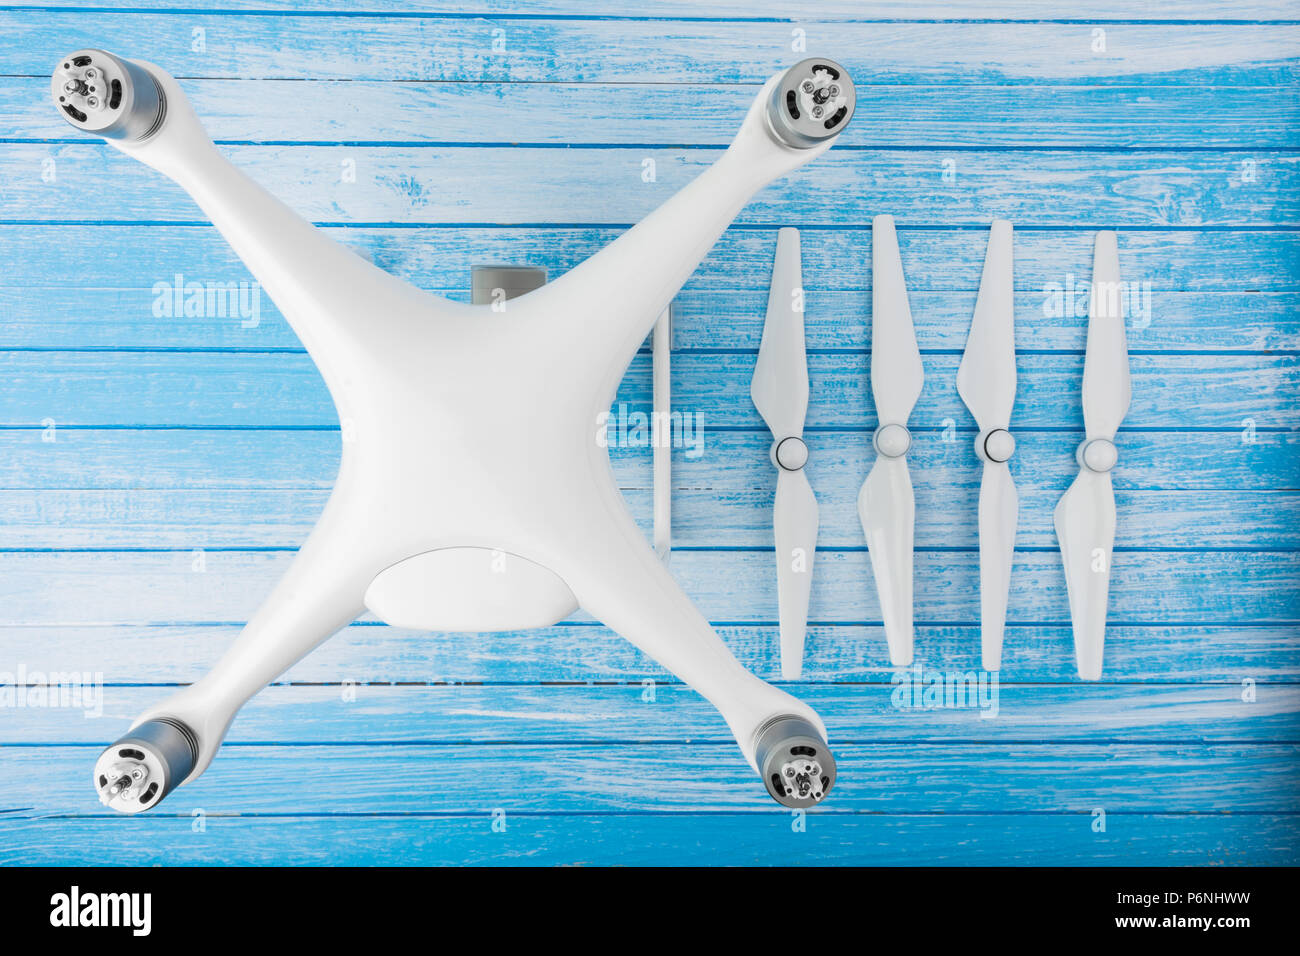 Modern High Tech Big White Drone With Propellers Detached On Blue And White Painted Wood Background Quadcopter Concept Top Angle Stock Photo